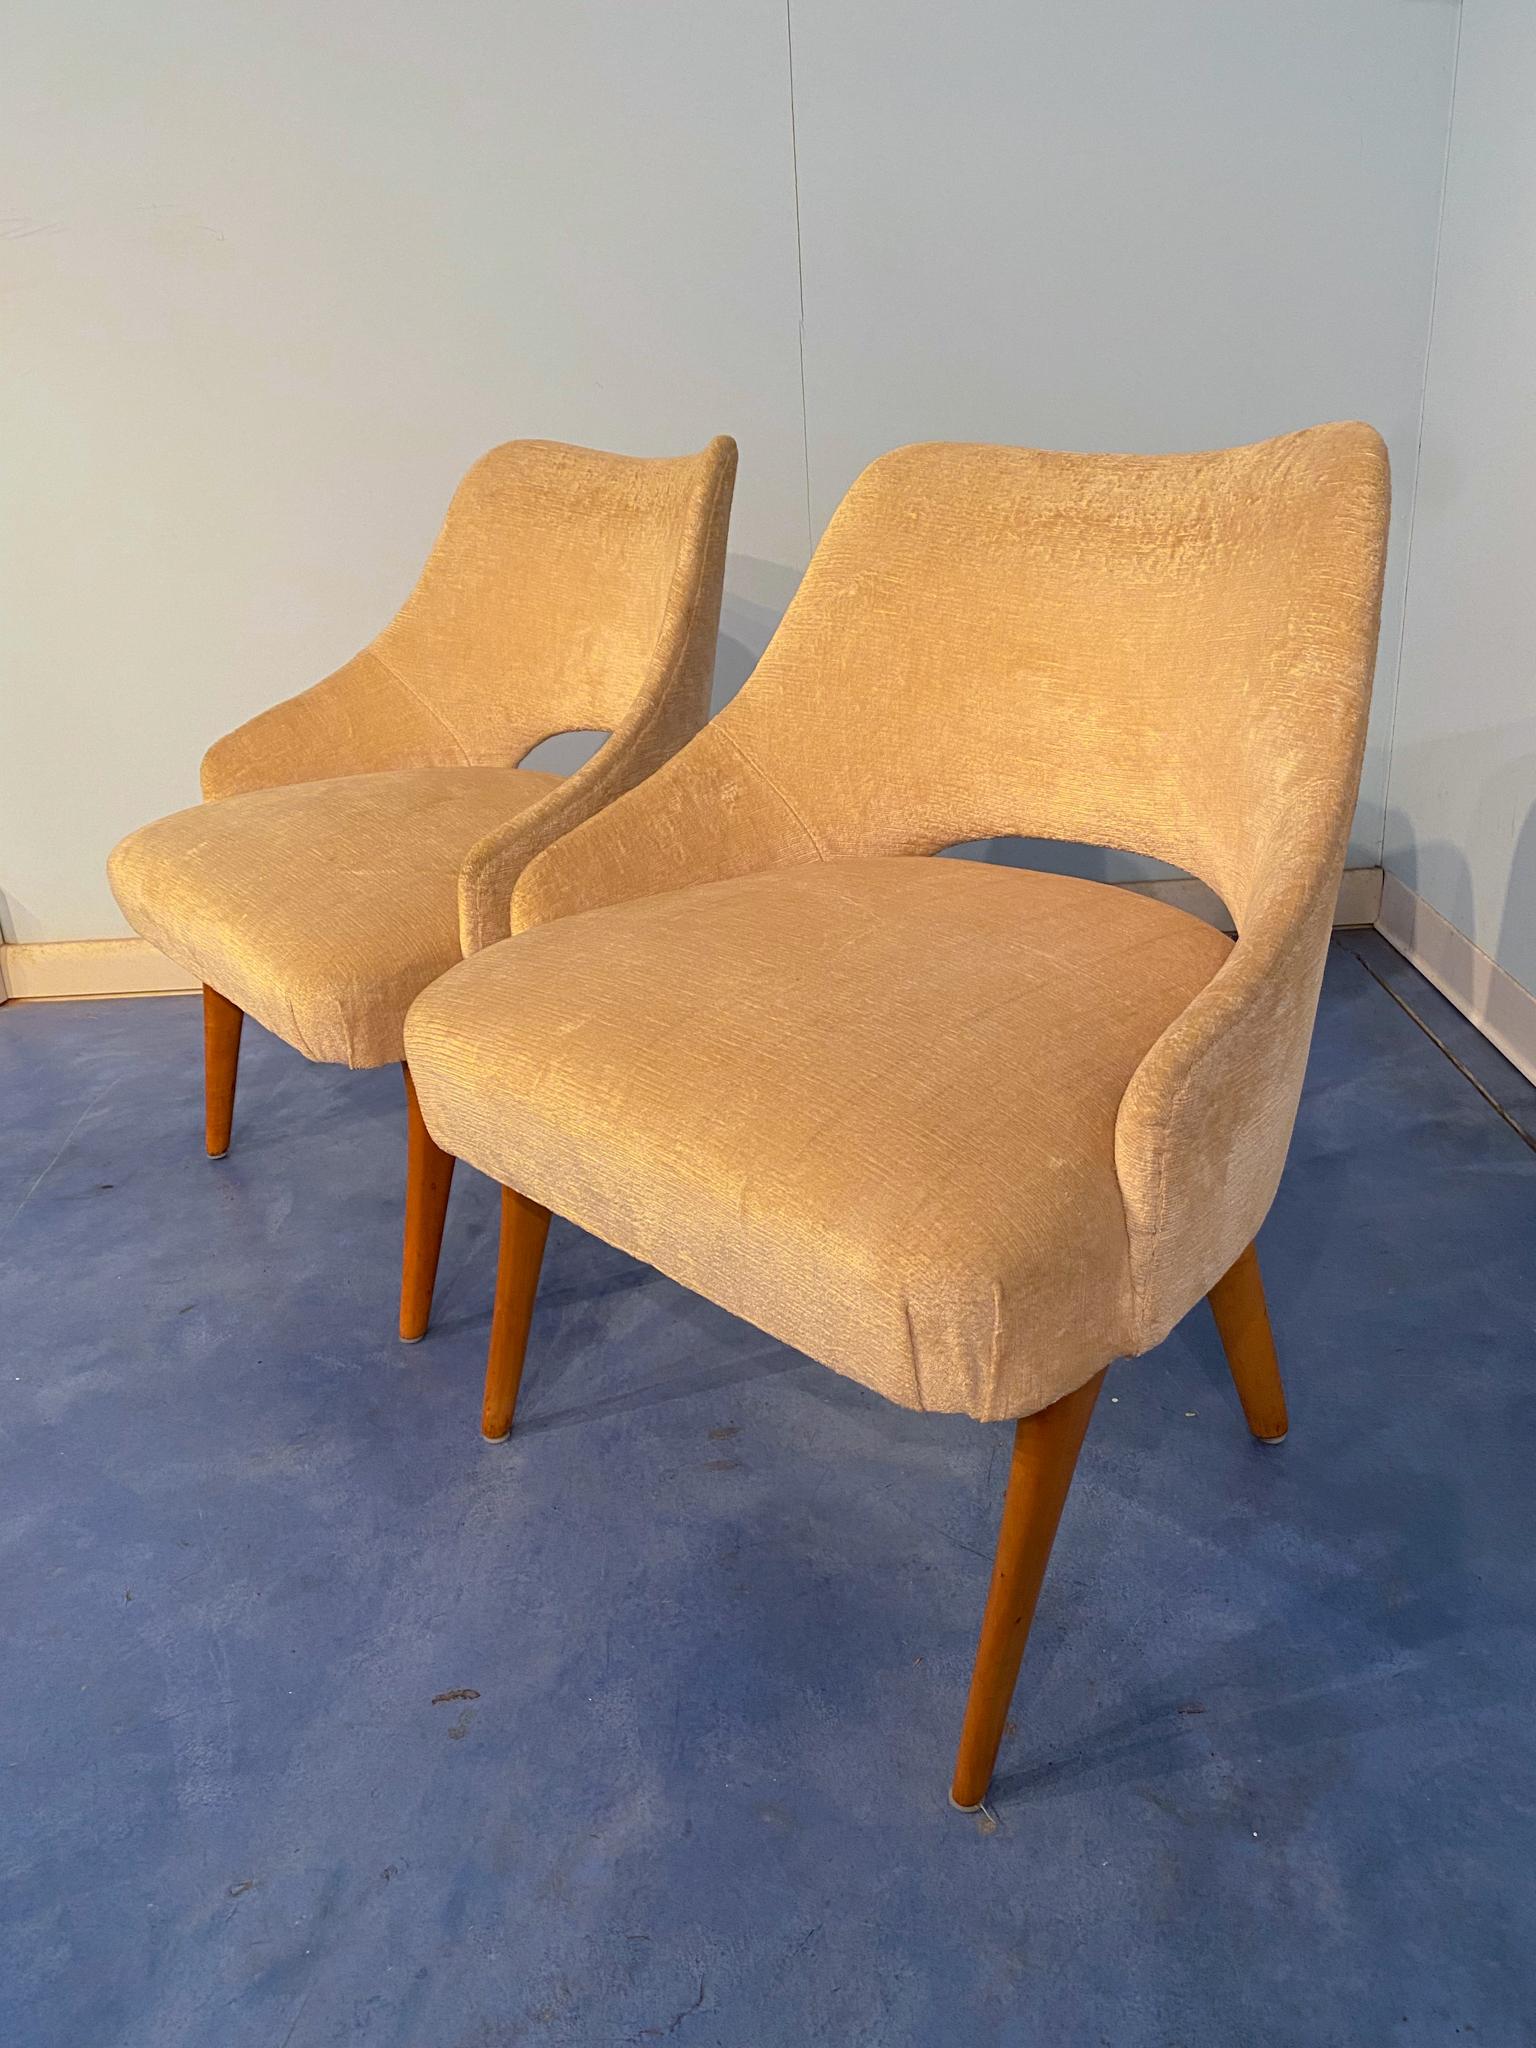 Made of maple and yellow velvet, these mid-century Italian armchairs or armchairs were designed by Vittorio Dassi in 1950. Elegant lines are characterized by soft and rounded shapes that make them pleasant to look at in any setting. The original